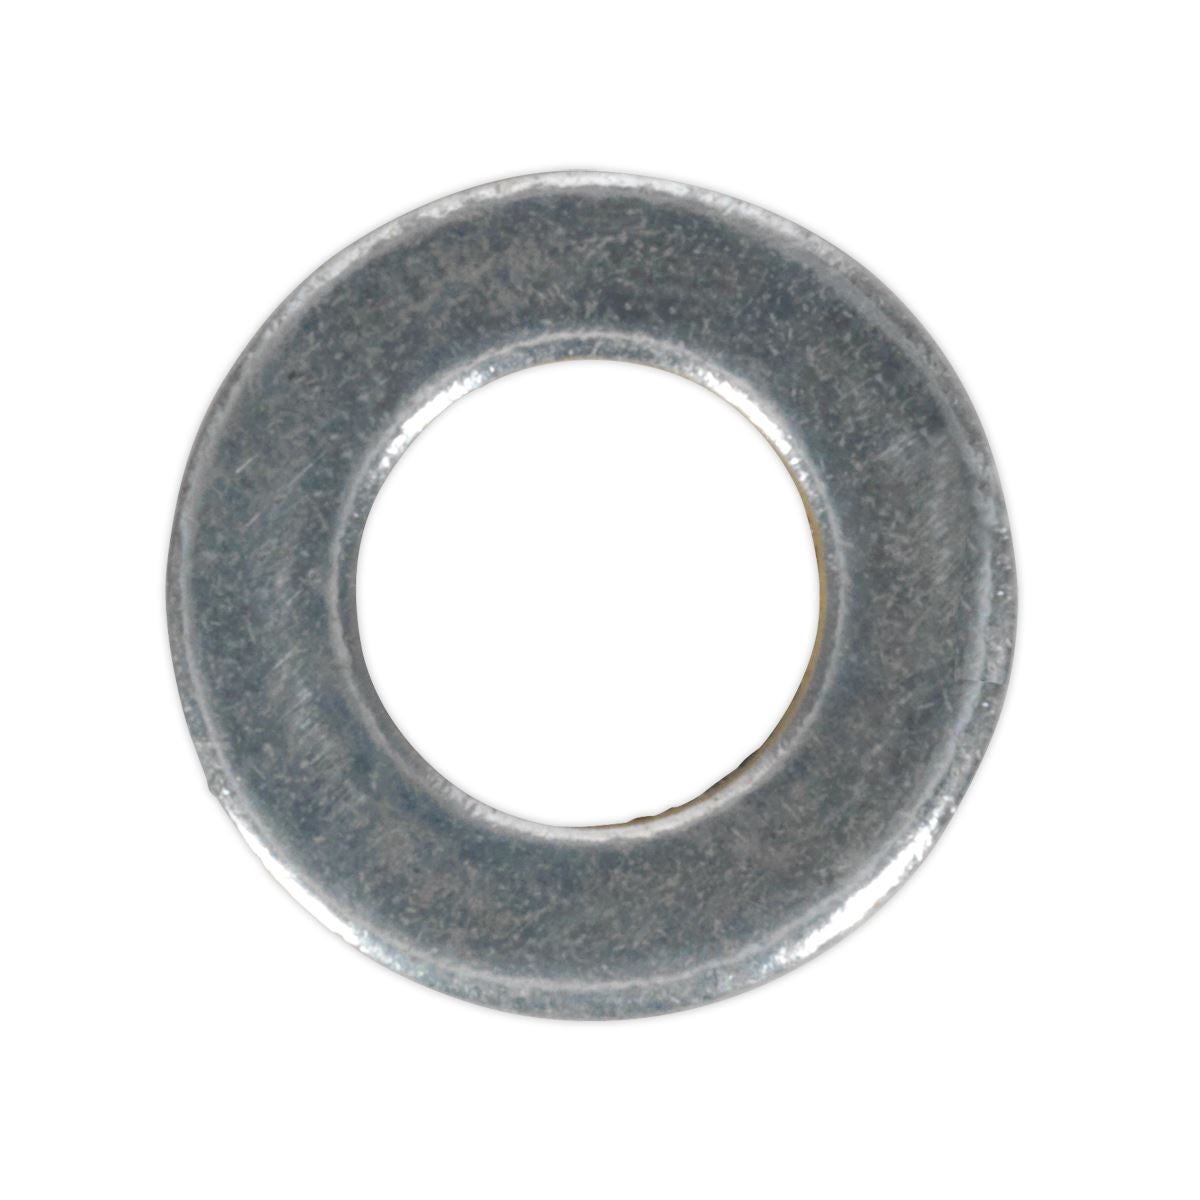 Sealey Flat Washer DIN 125 - M6 x 12mm Form A Zinc Pack of 100